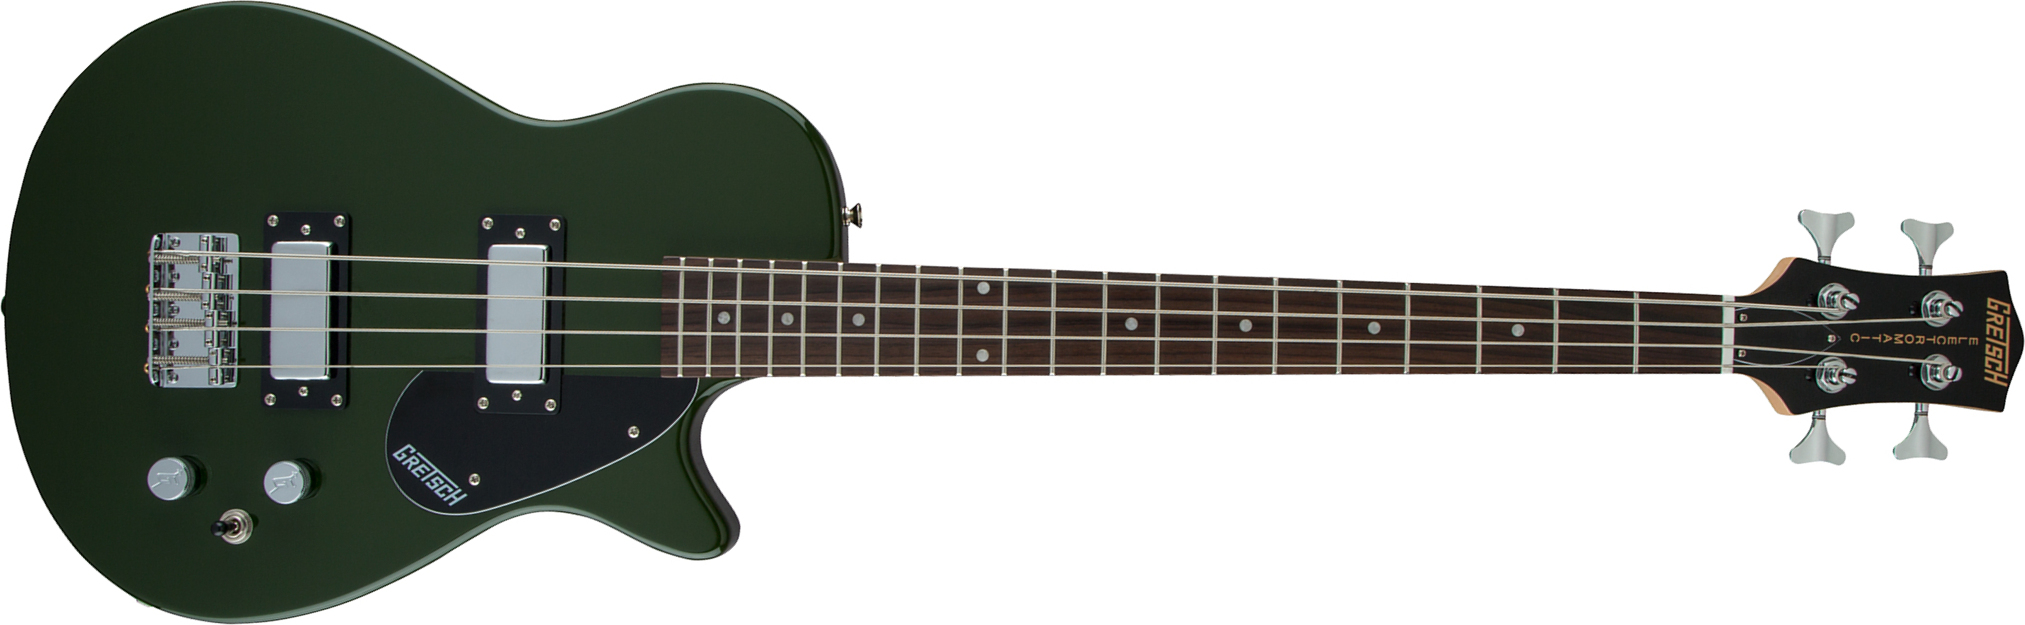 Gretsch G2220 Junior Jet Bass Ii Short Scale Electromatic Wal - Torino Green - Electric bass for kids - Main picture